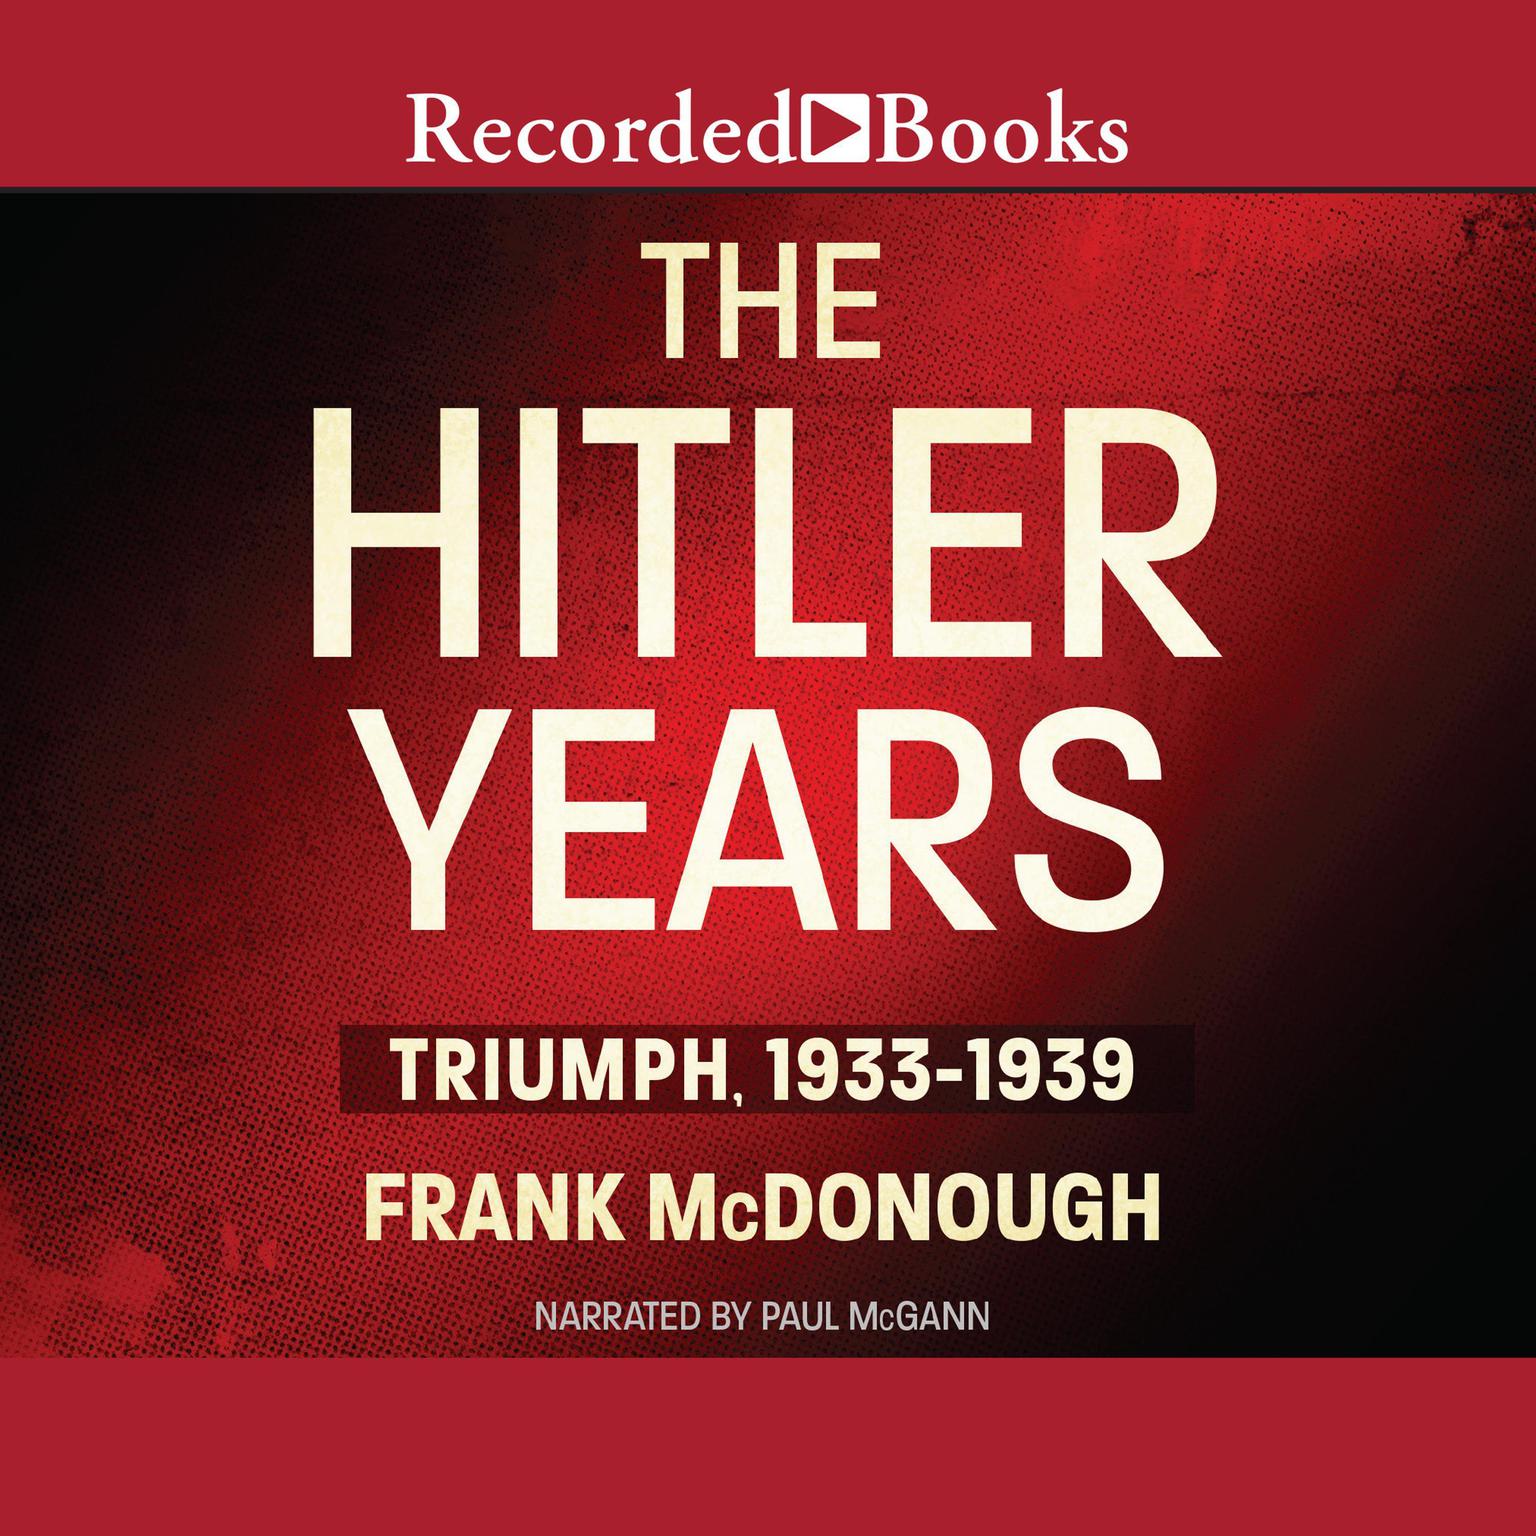 The Hitler Years: Triumph, 1933-1939 Audiobook, by Frank McDonough